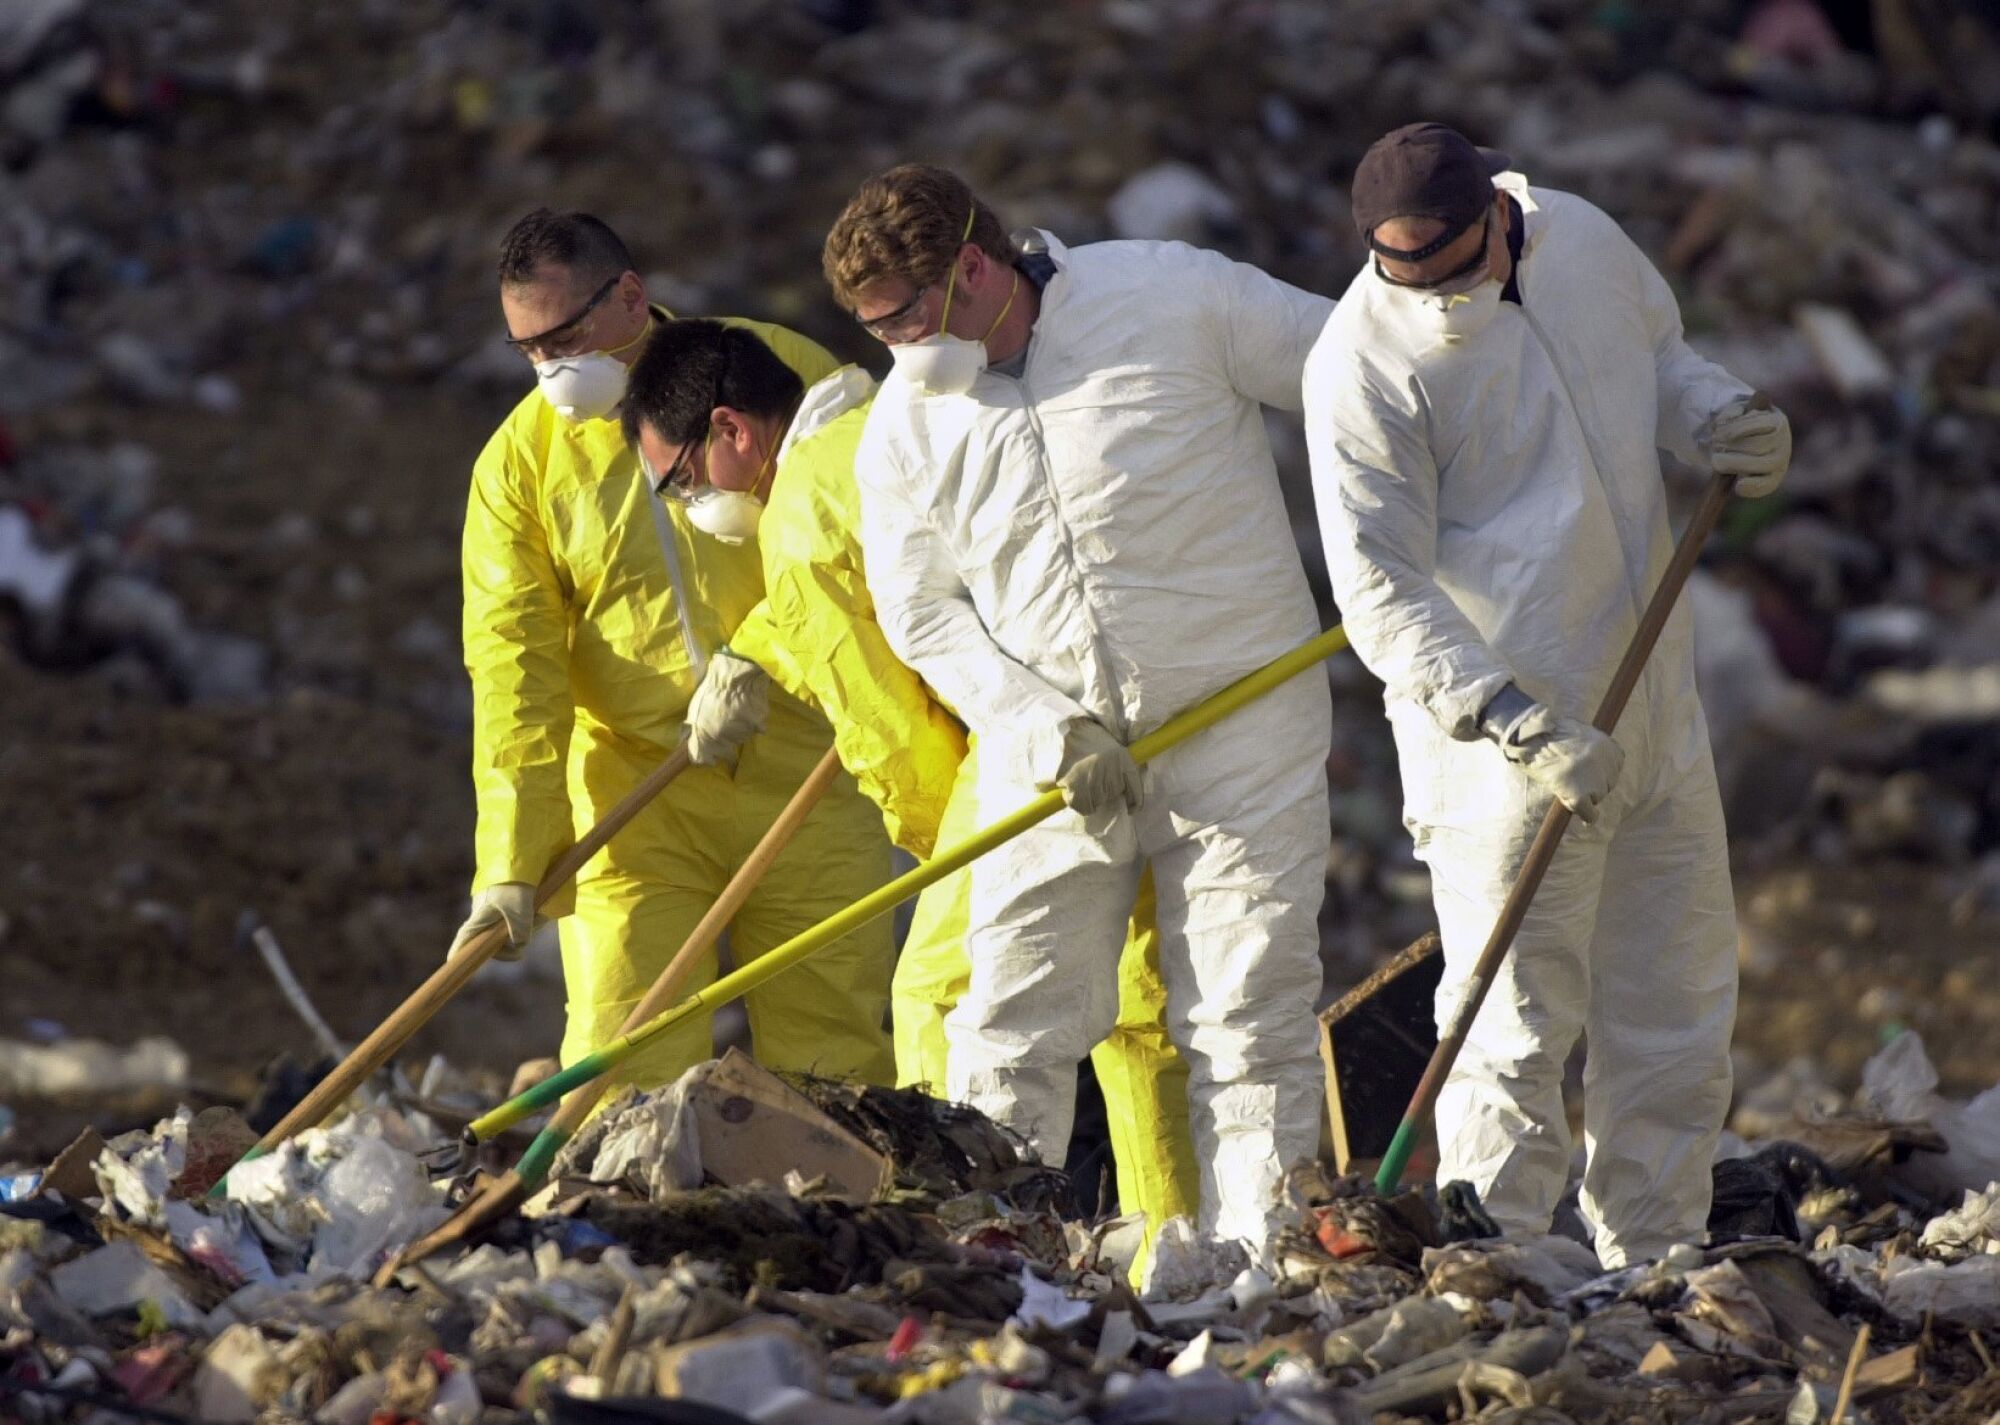 San Diego police officers in protective jumpsuits sift through trash at the Miramar Landfill.